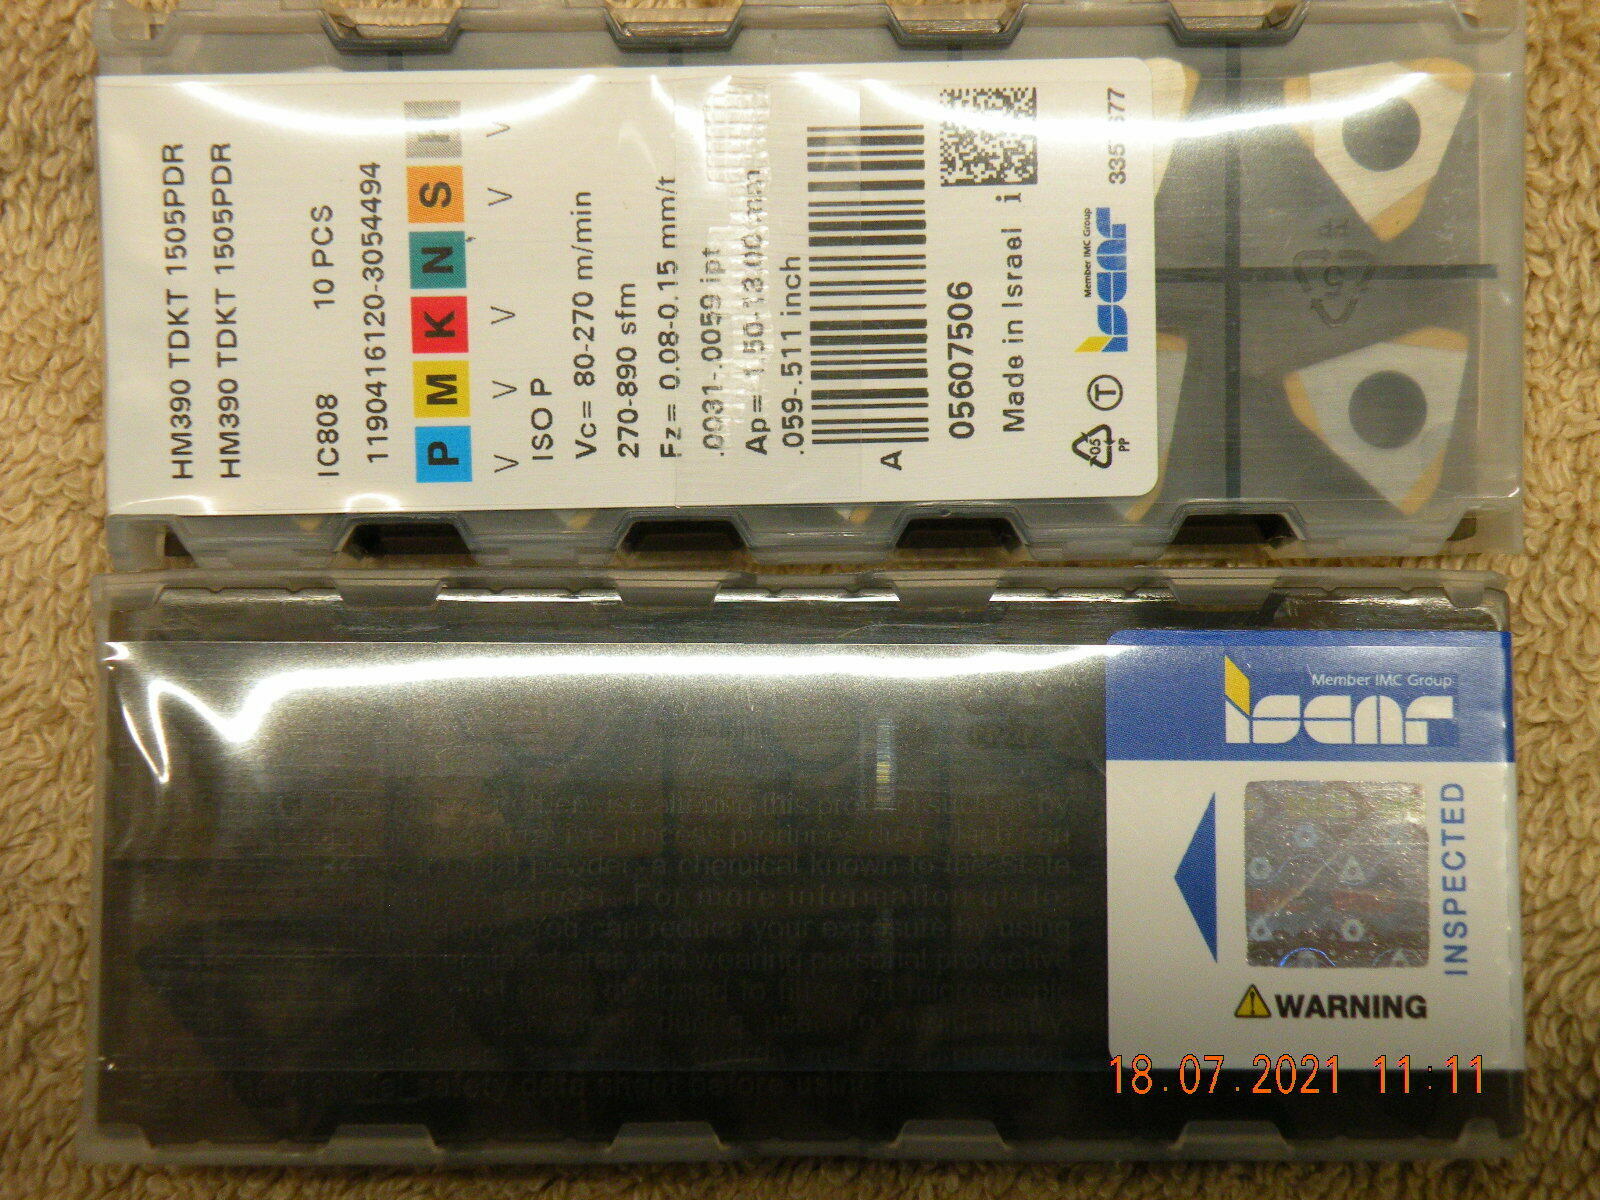 ISCAR H390 TDKT 1505PDR IC808 ISCAR CARBIDE INSERT 10 Pieces Brand New 